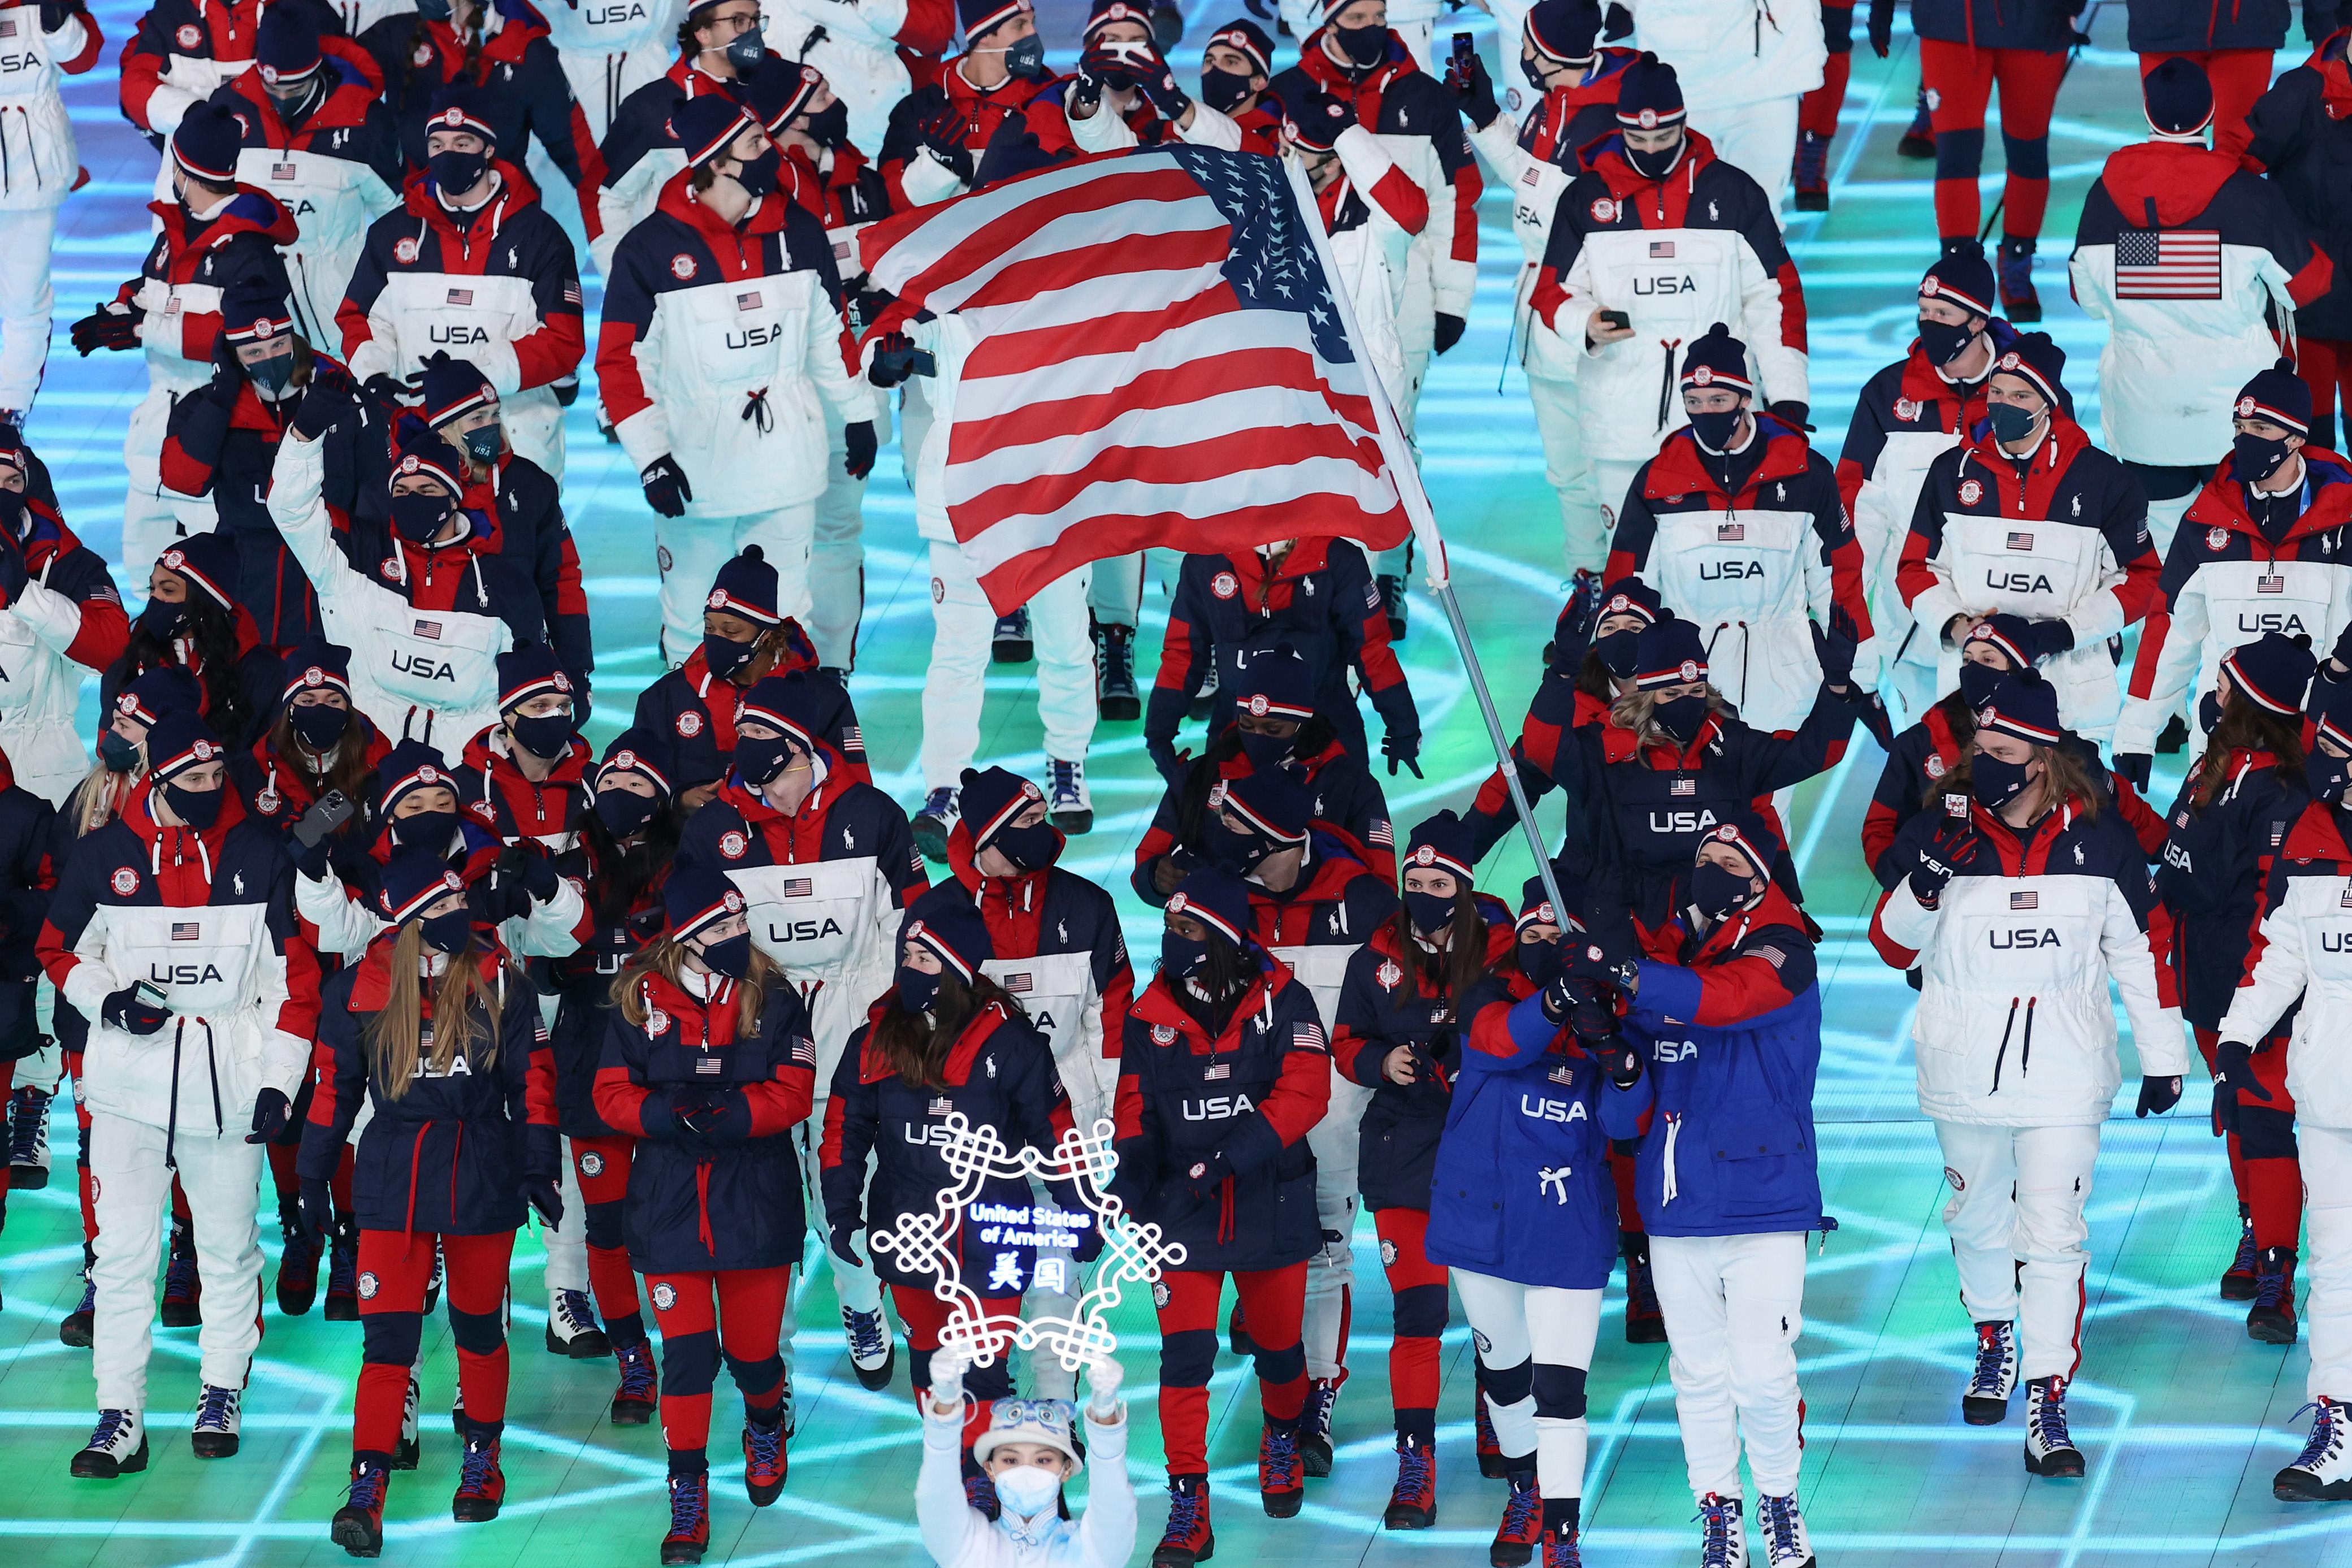 Team USA marches as a group.